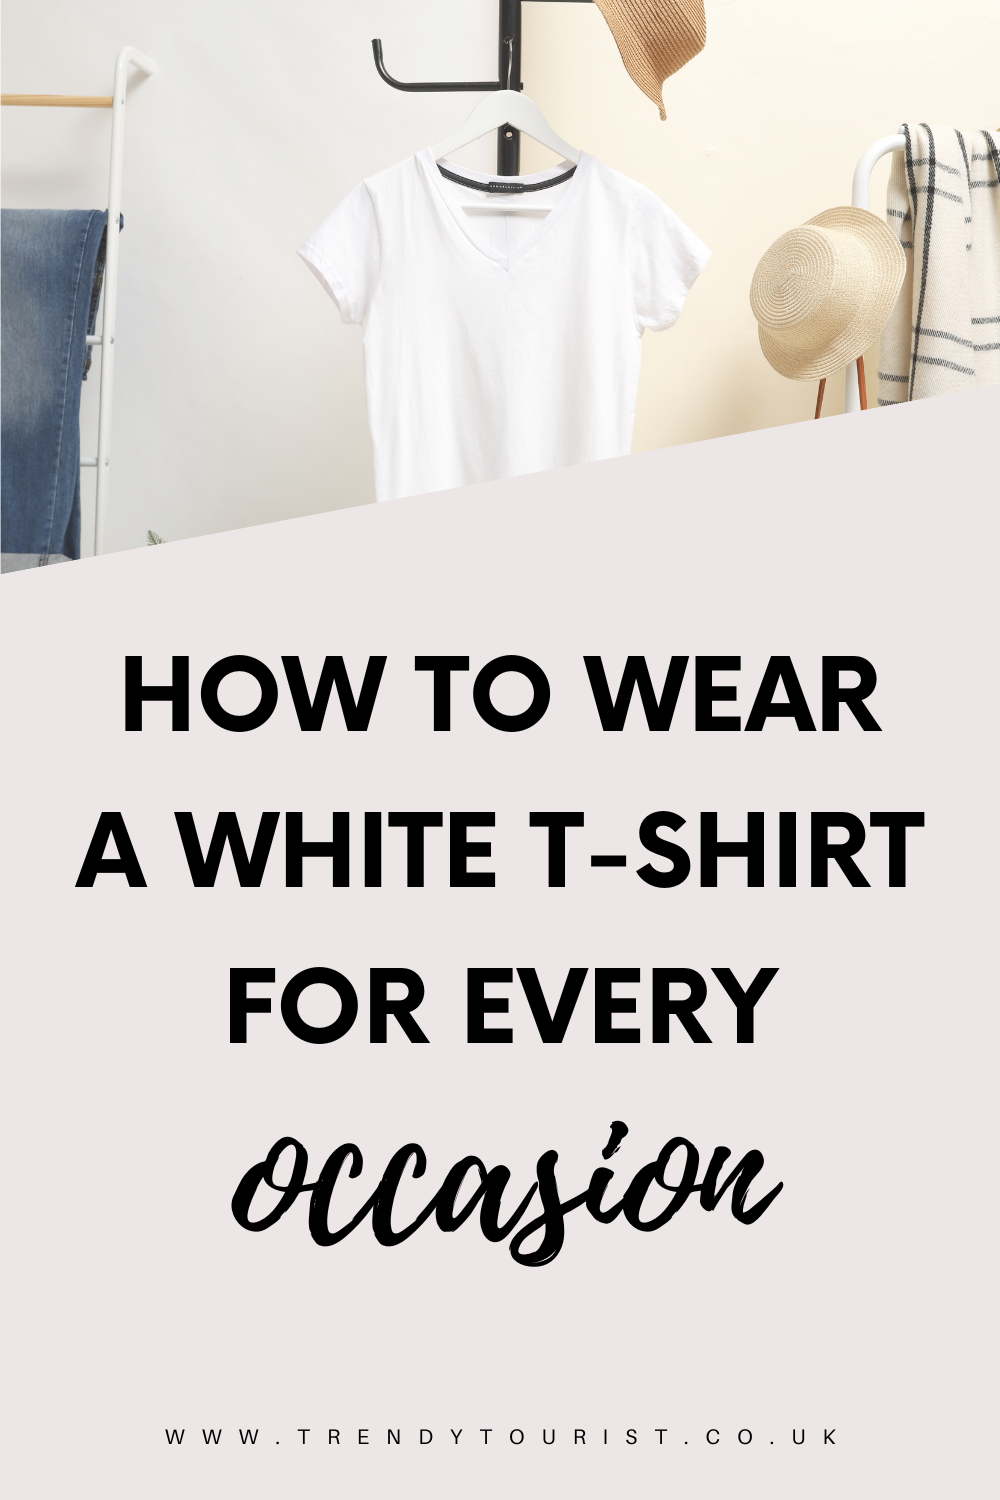 How to Wear a White T-Shirt for Every Occasion